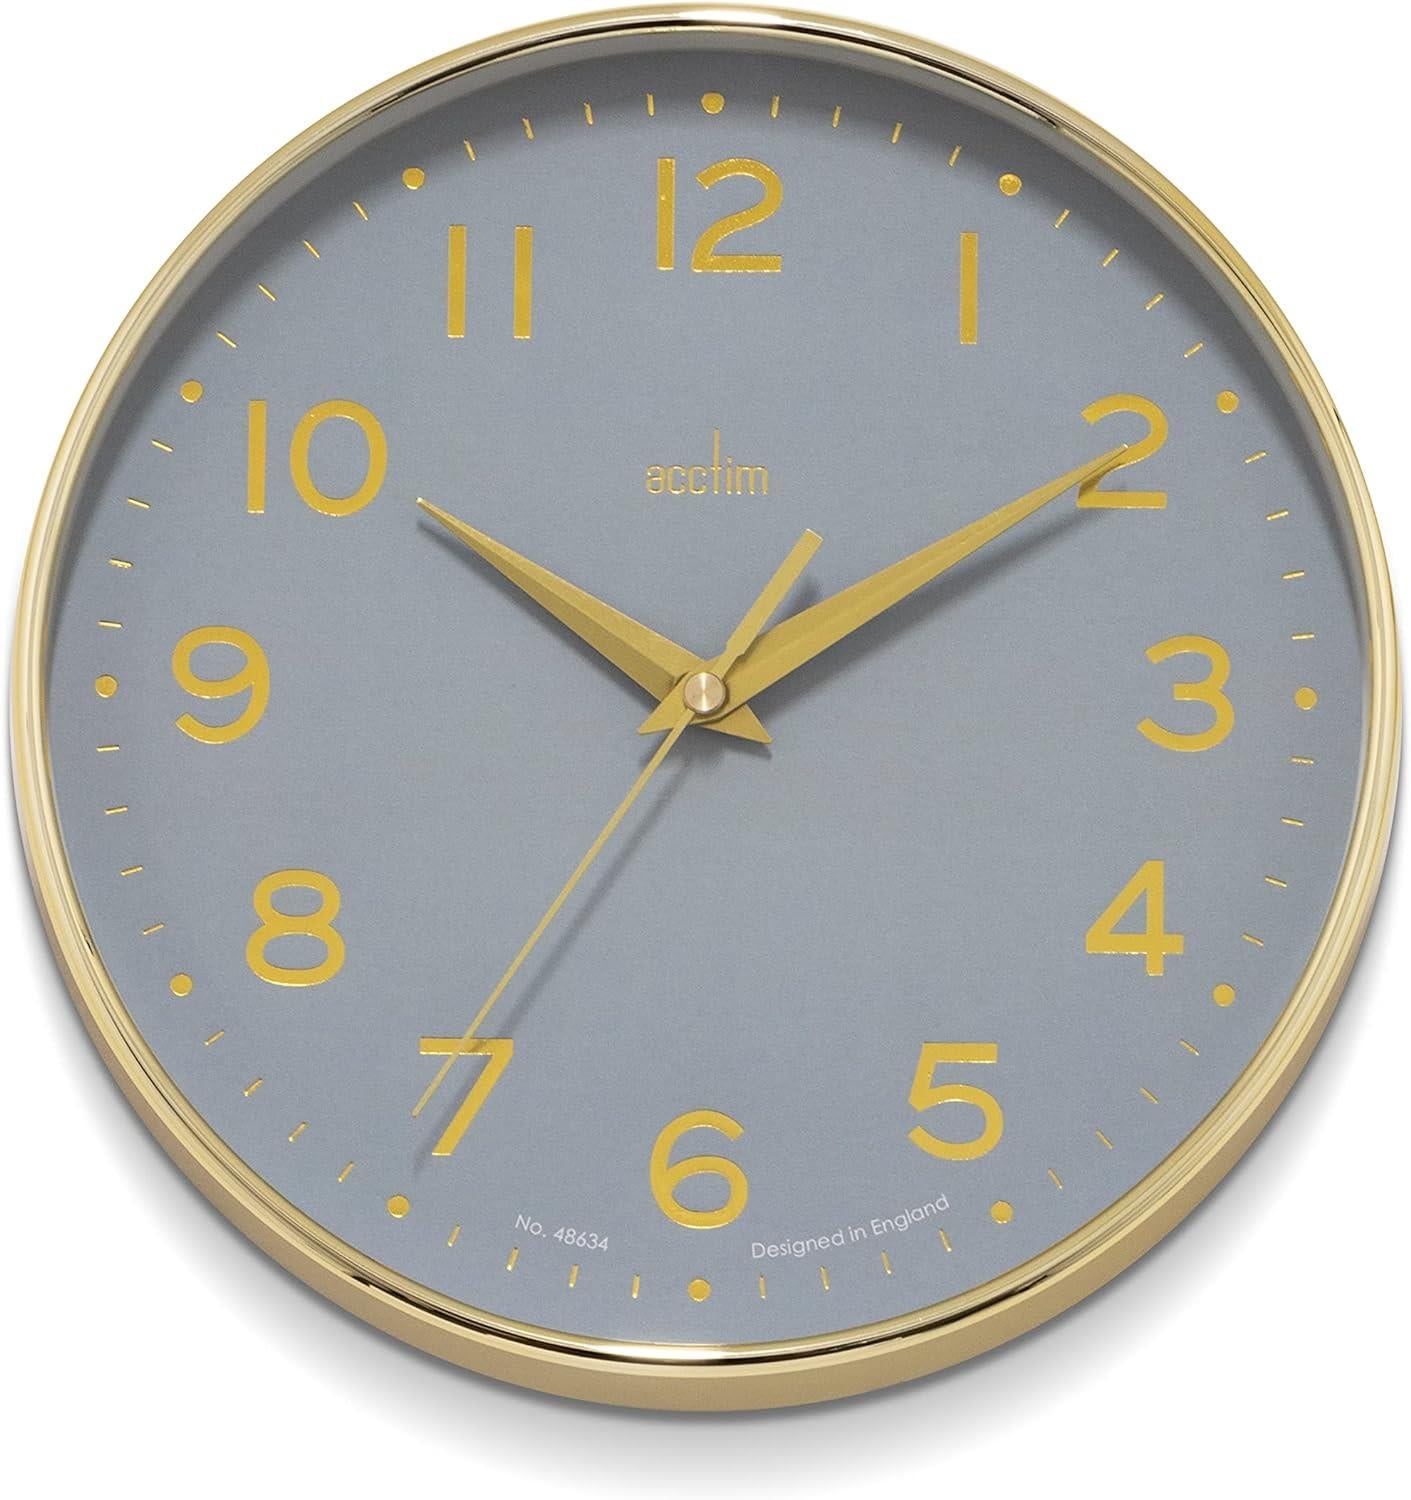 Acctim Rand 20cm Small Dial Foil Embossed Numbers Quartz Wall Clock Available Multiple Colour